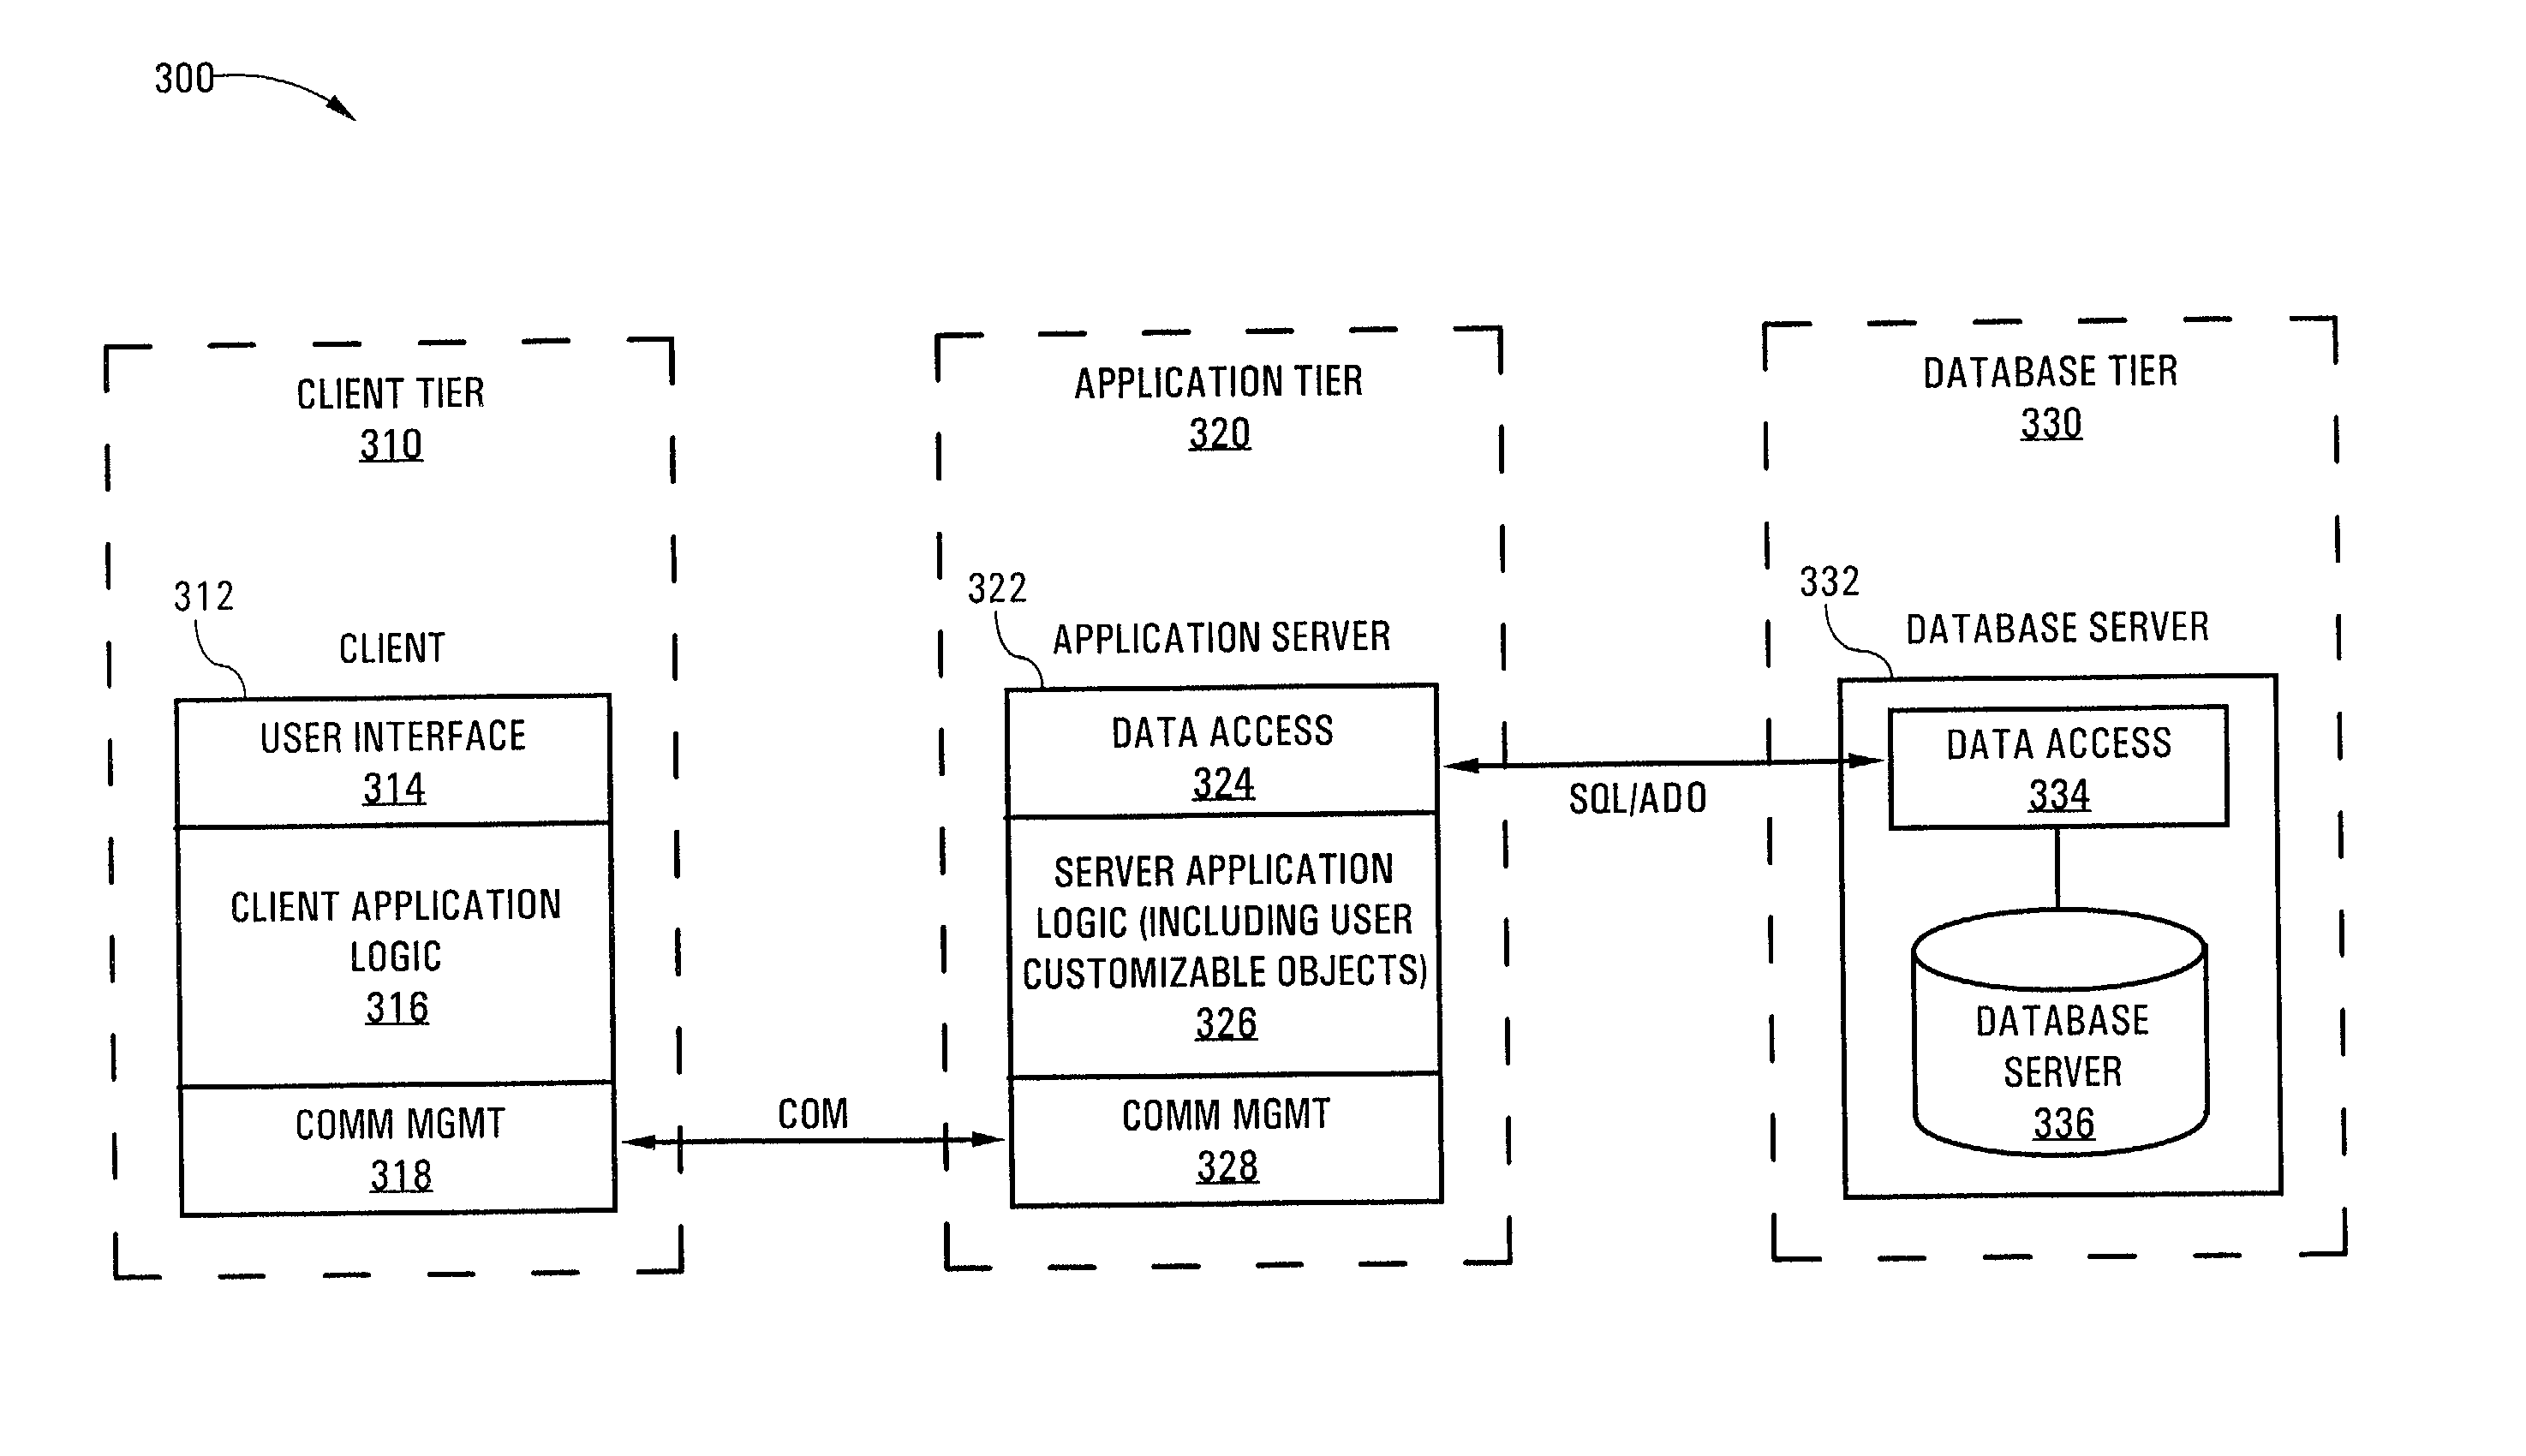 Customizable remote order entry system and method